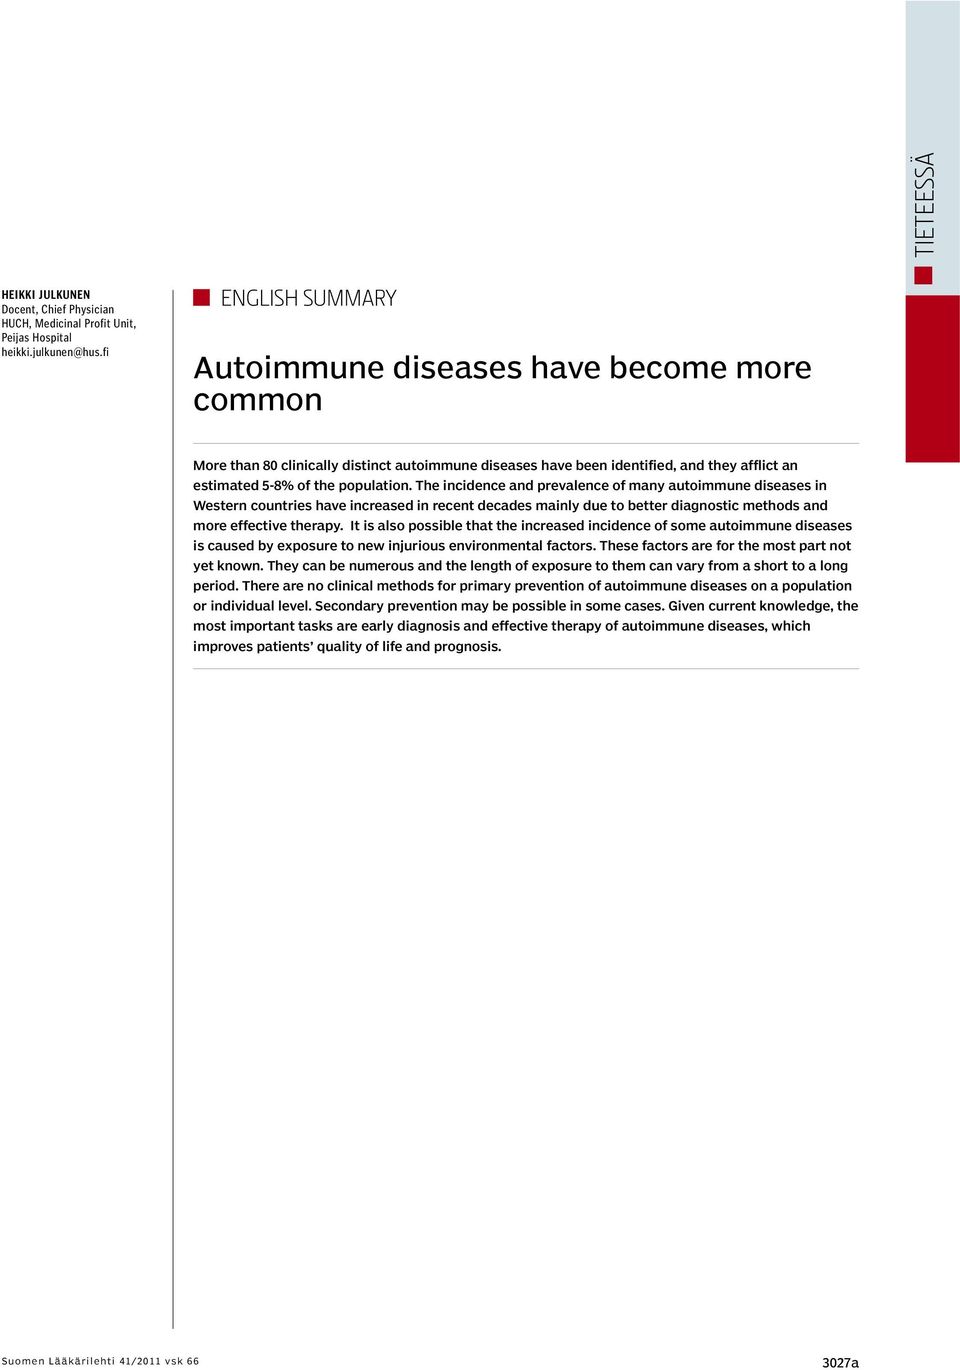 The incidence and prevalence of many autoimmune diseases in Western countries have increased in recent decades mainly due to better diagnostic methods and more effective therapy.